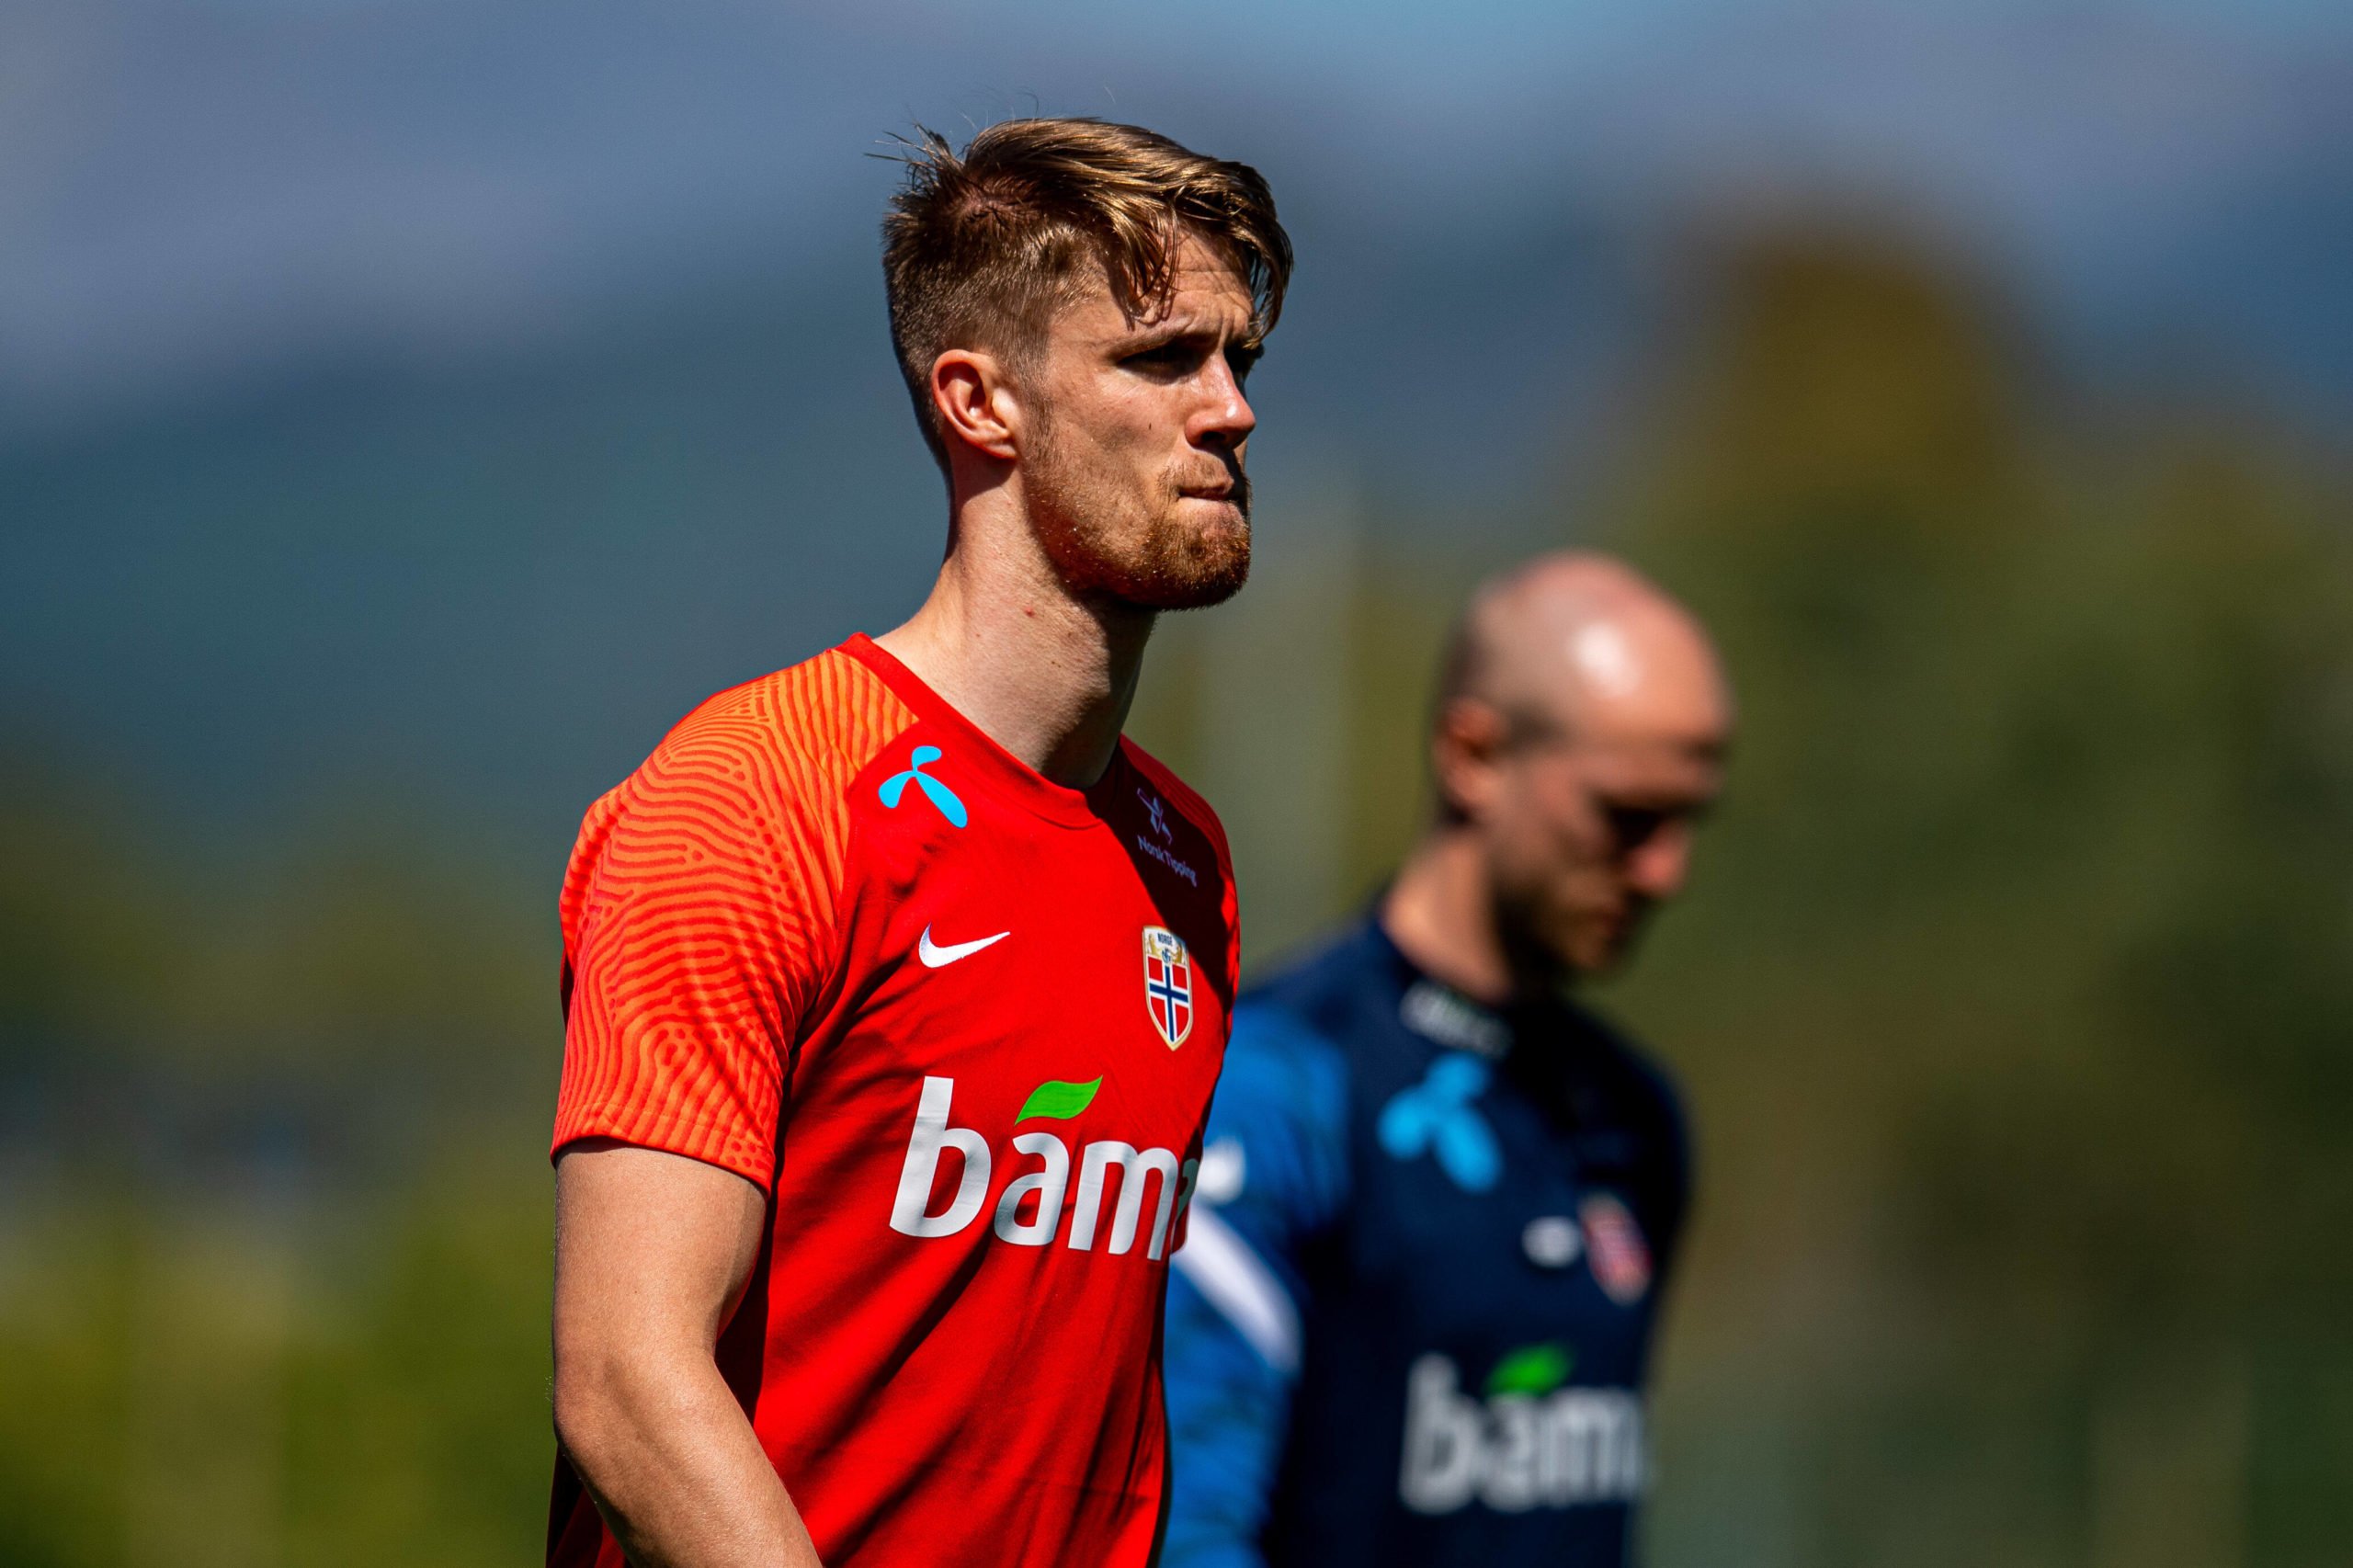 Newcastle United prepared to move in for Kristoffer Ajer who is seen in the photo